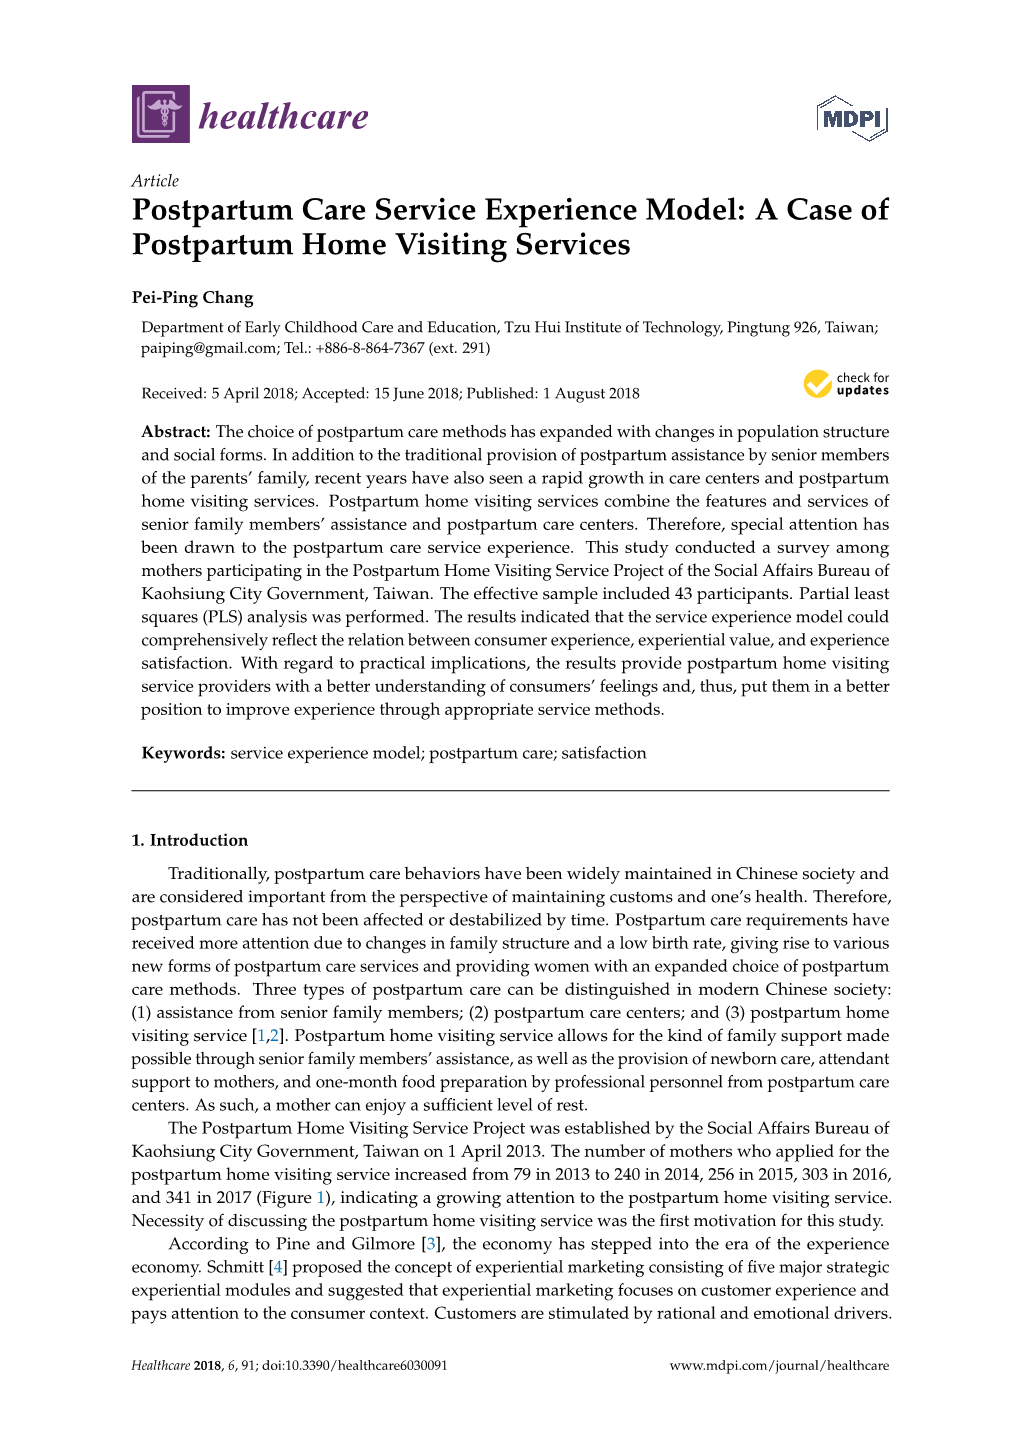 Postpartum Care Service Experience Model: a Case of Postpartum Home Visiting Services